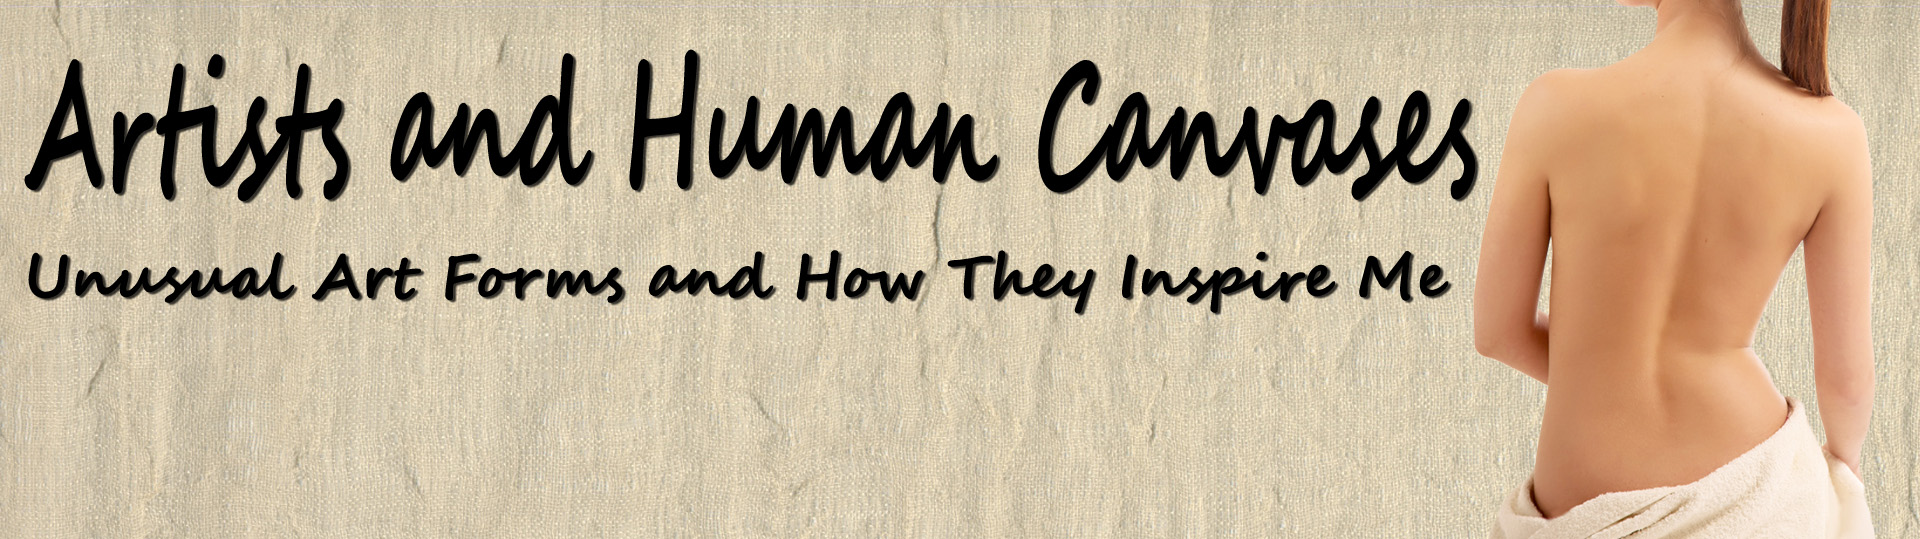 Artists and Human Canvases